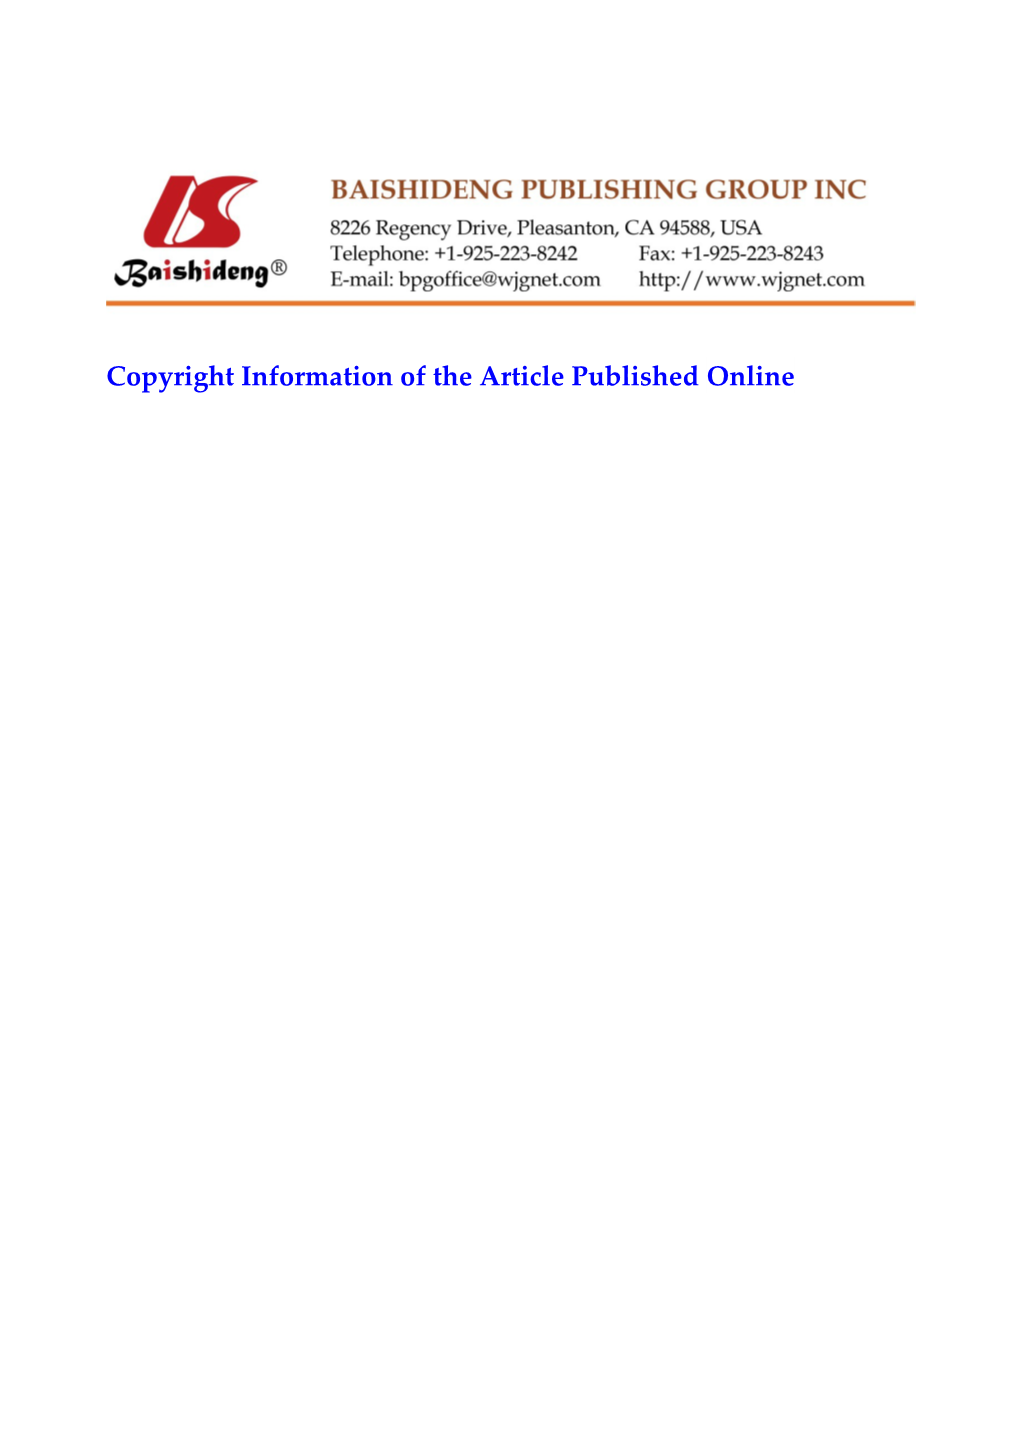 Copyright Information of the Article Publishedonline